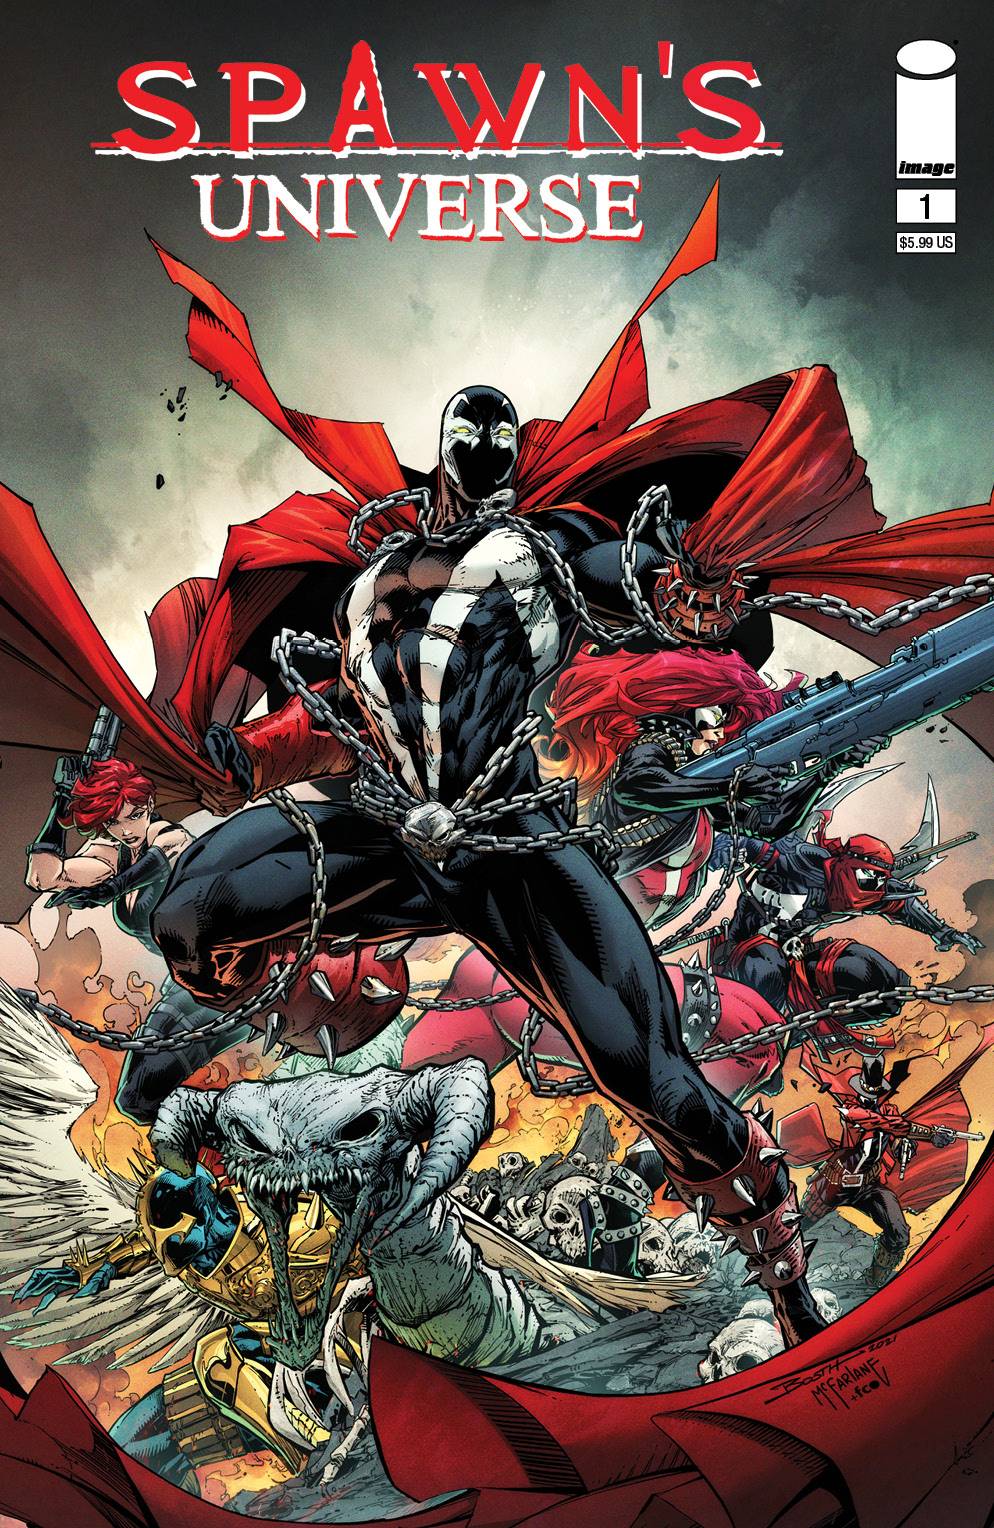 [6 PACK] SPAWN UNIVERSE #1 (06/23/2021)